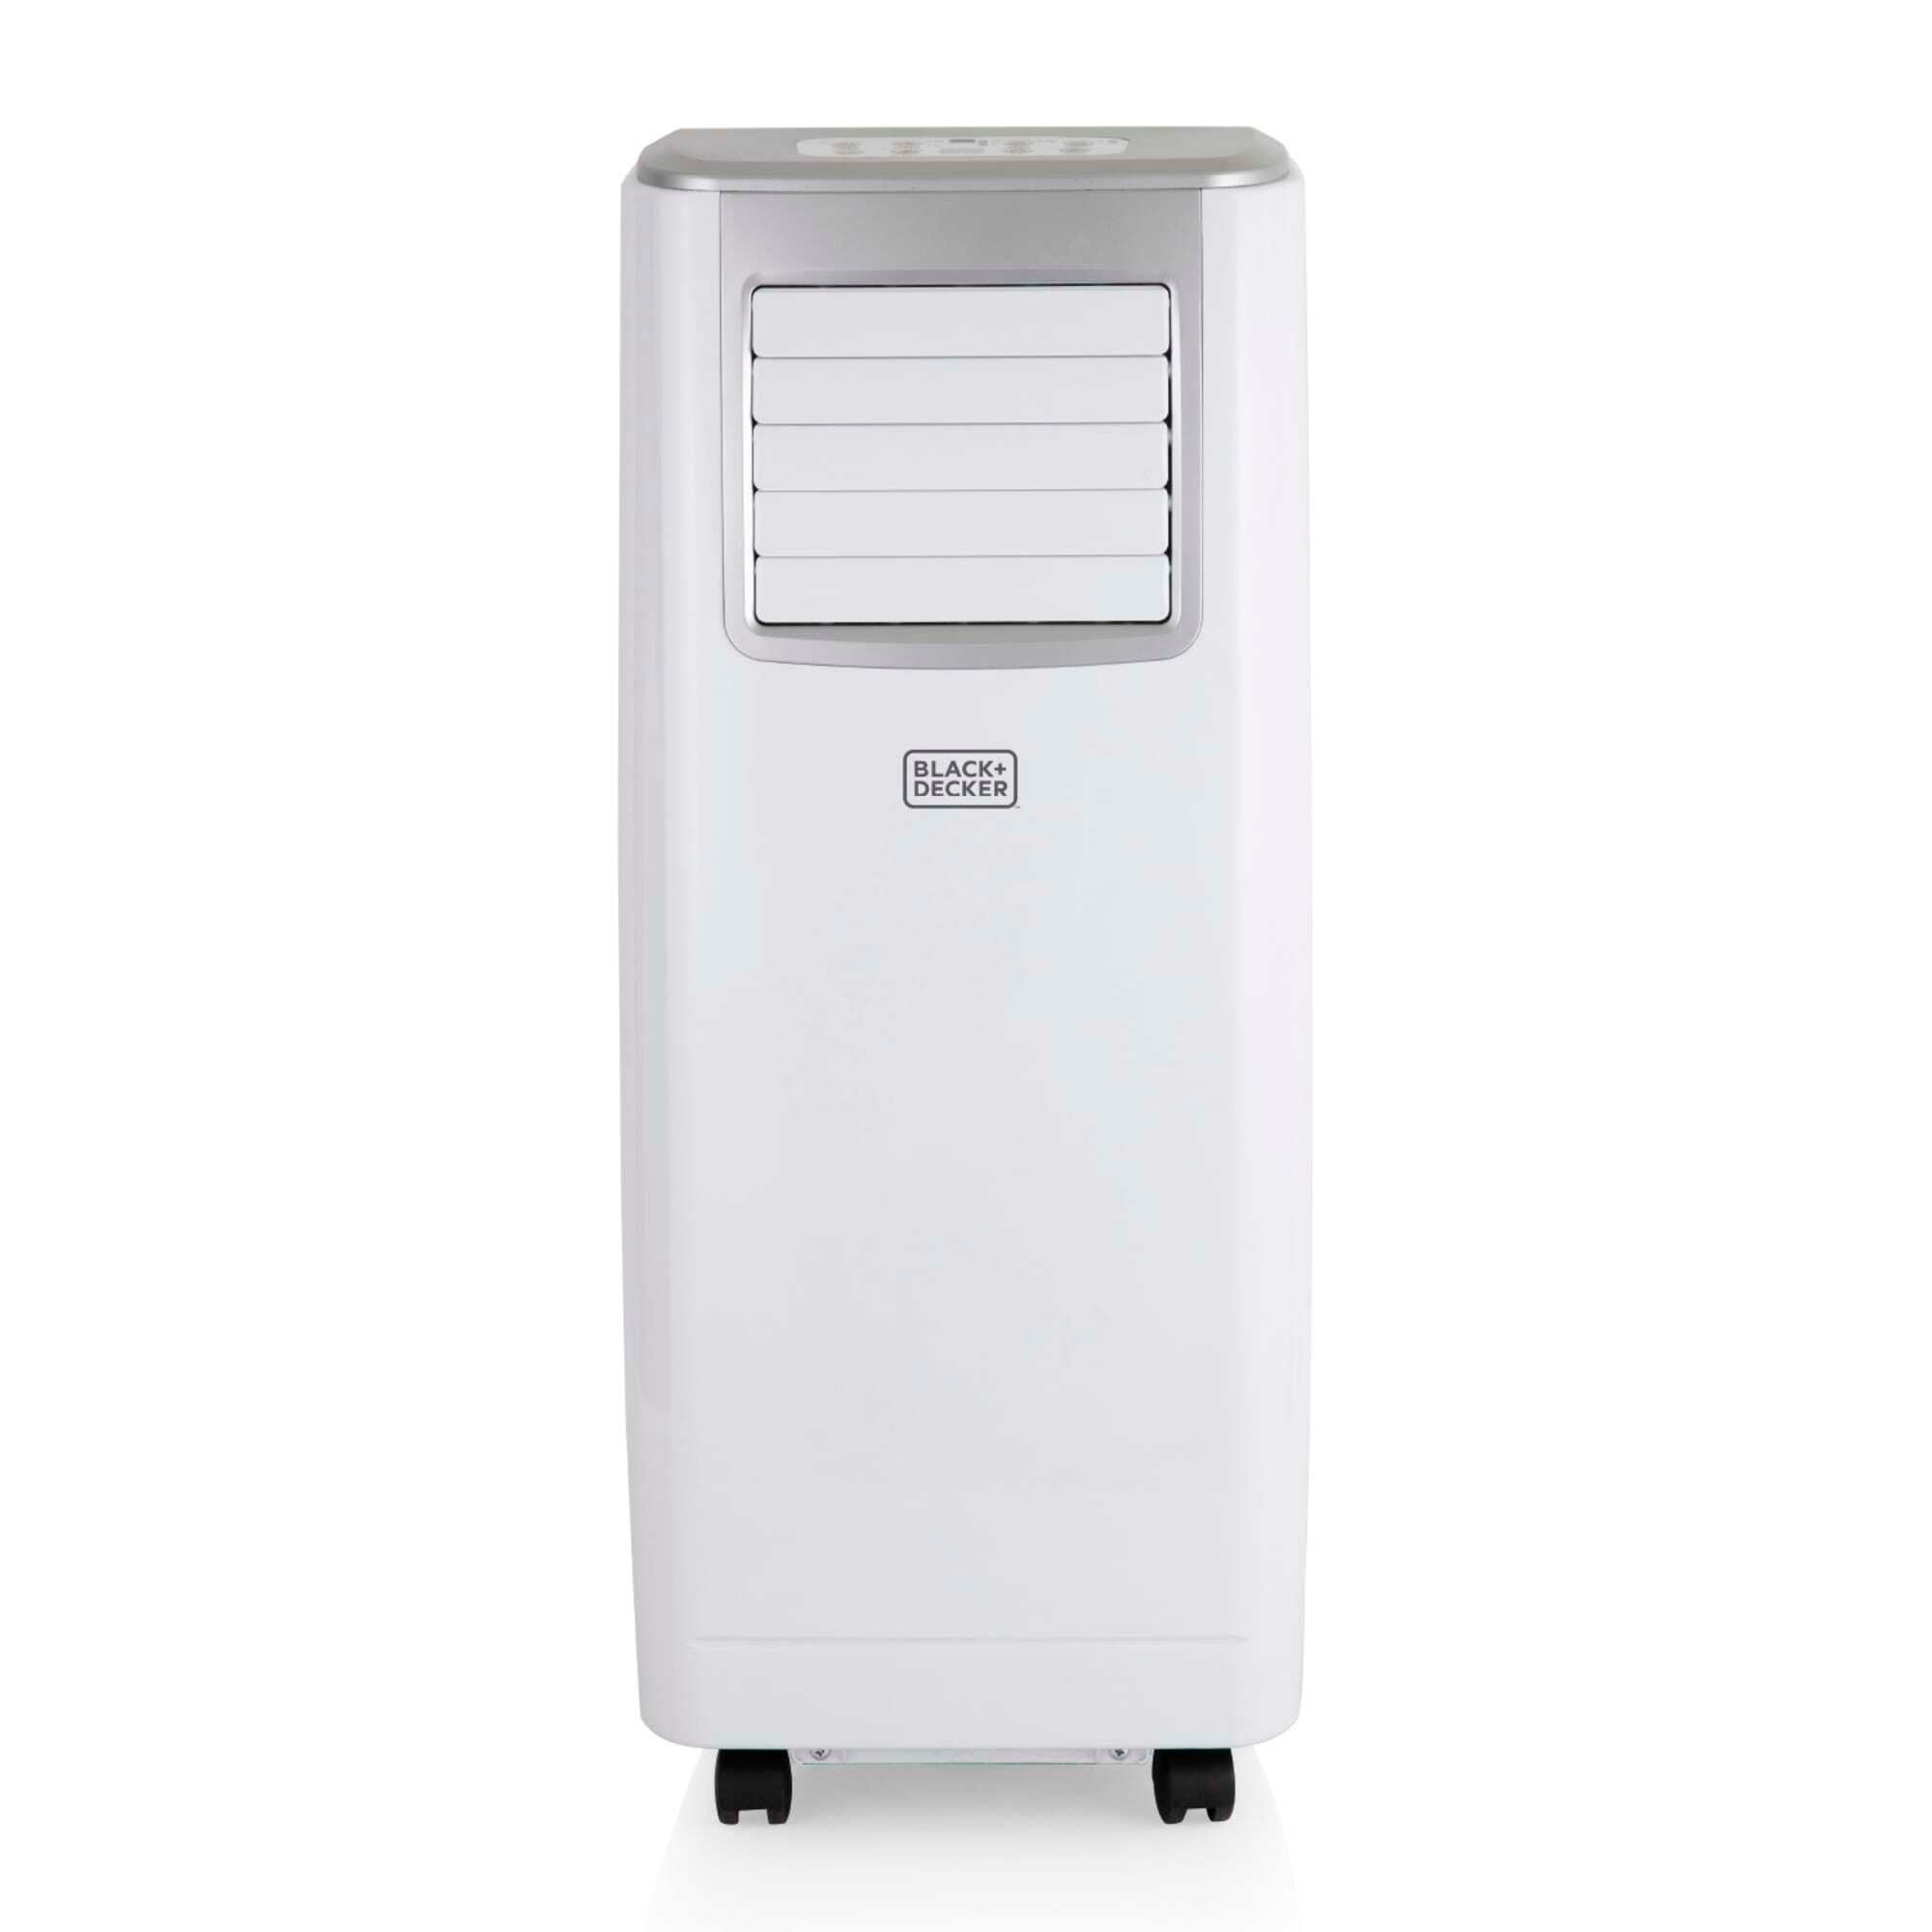 Portable 3 in 1 Air Conditioner and Timer White